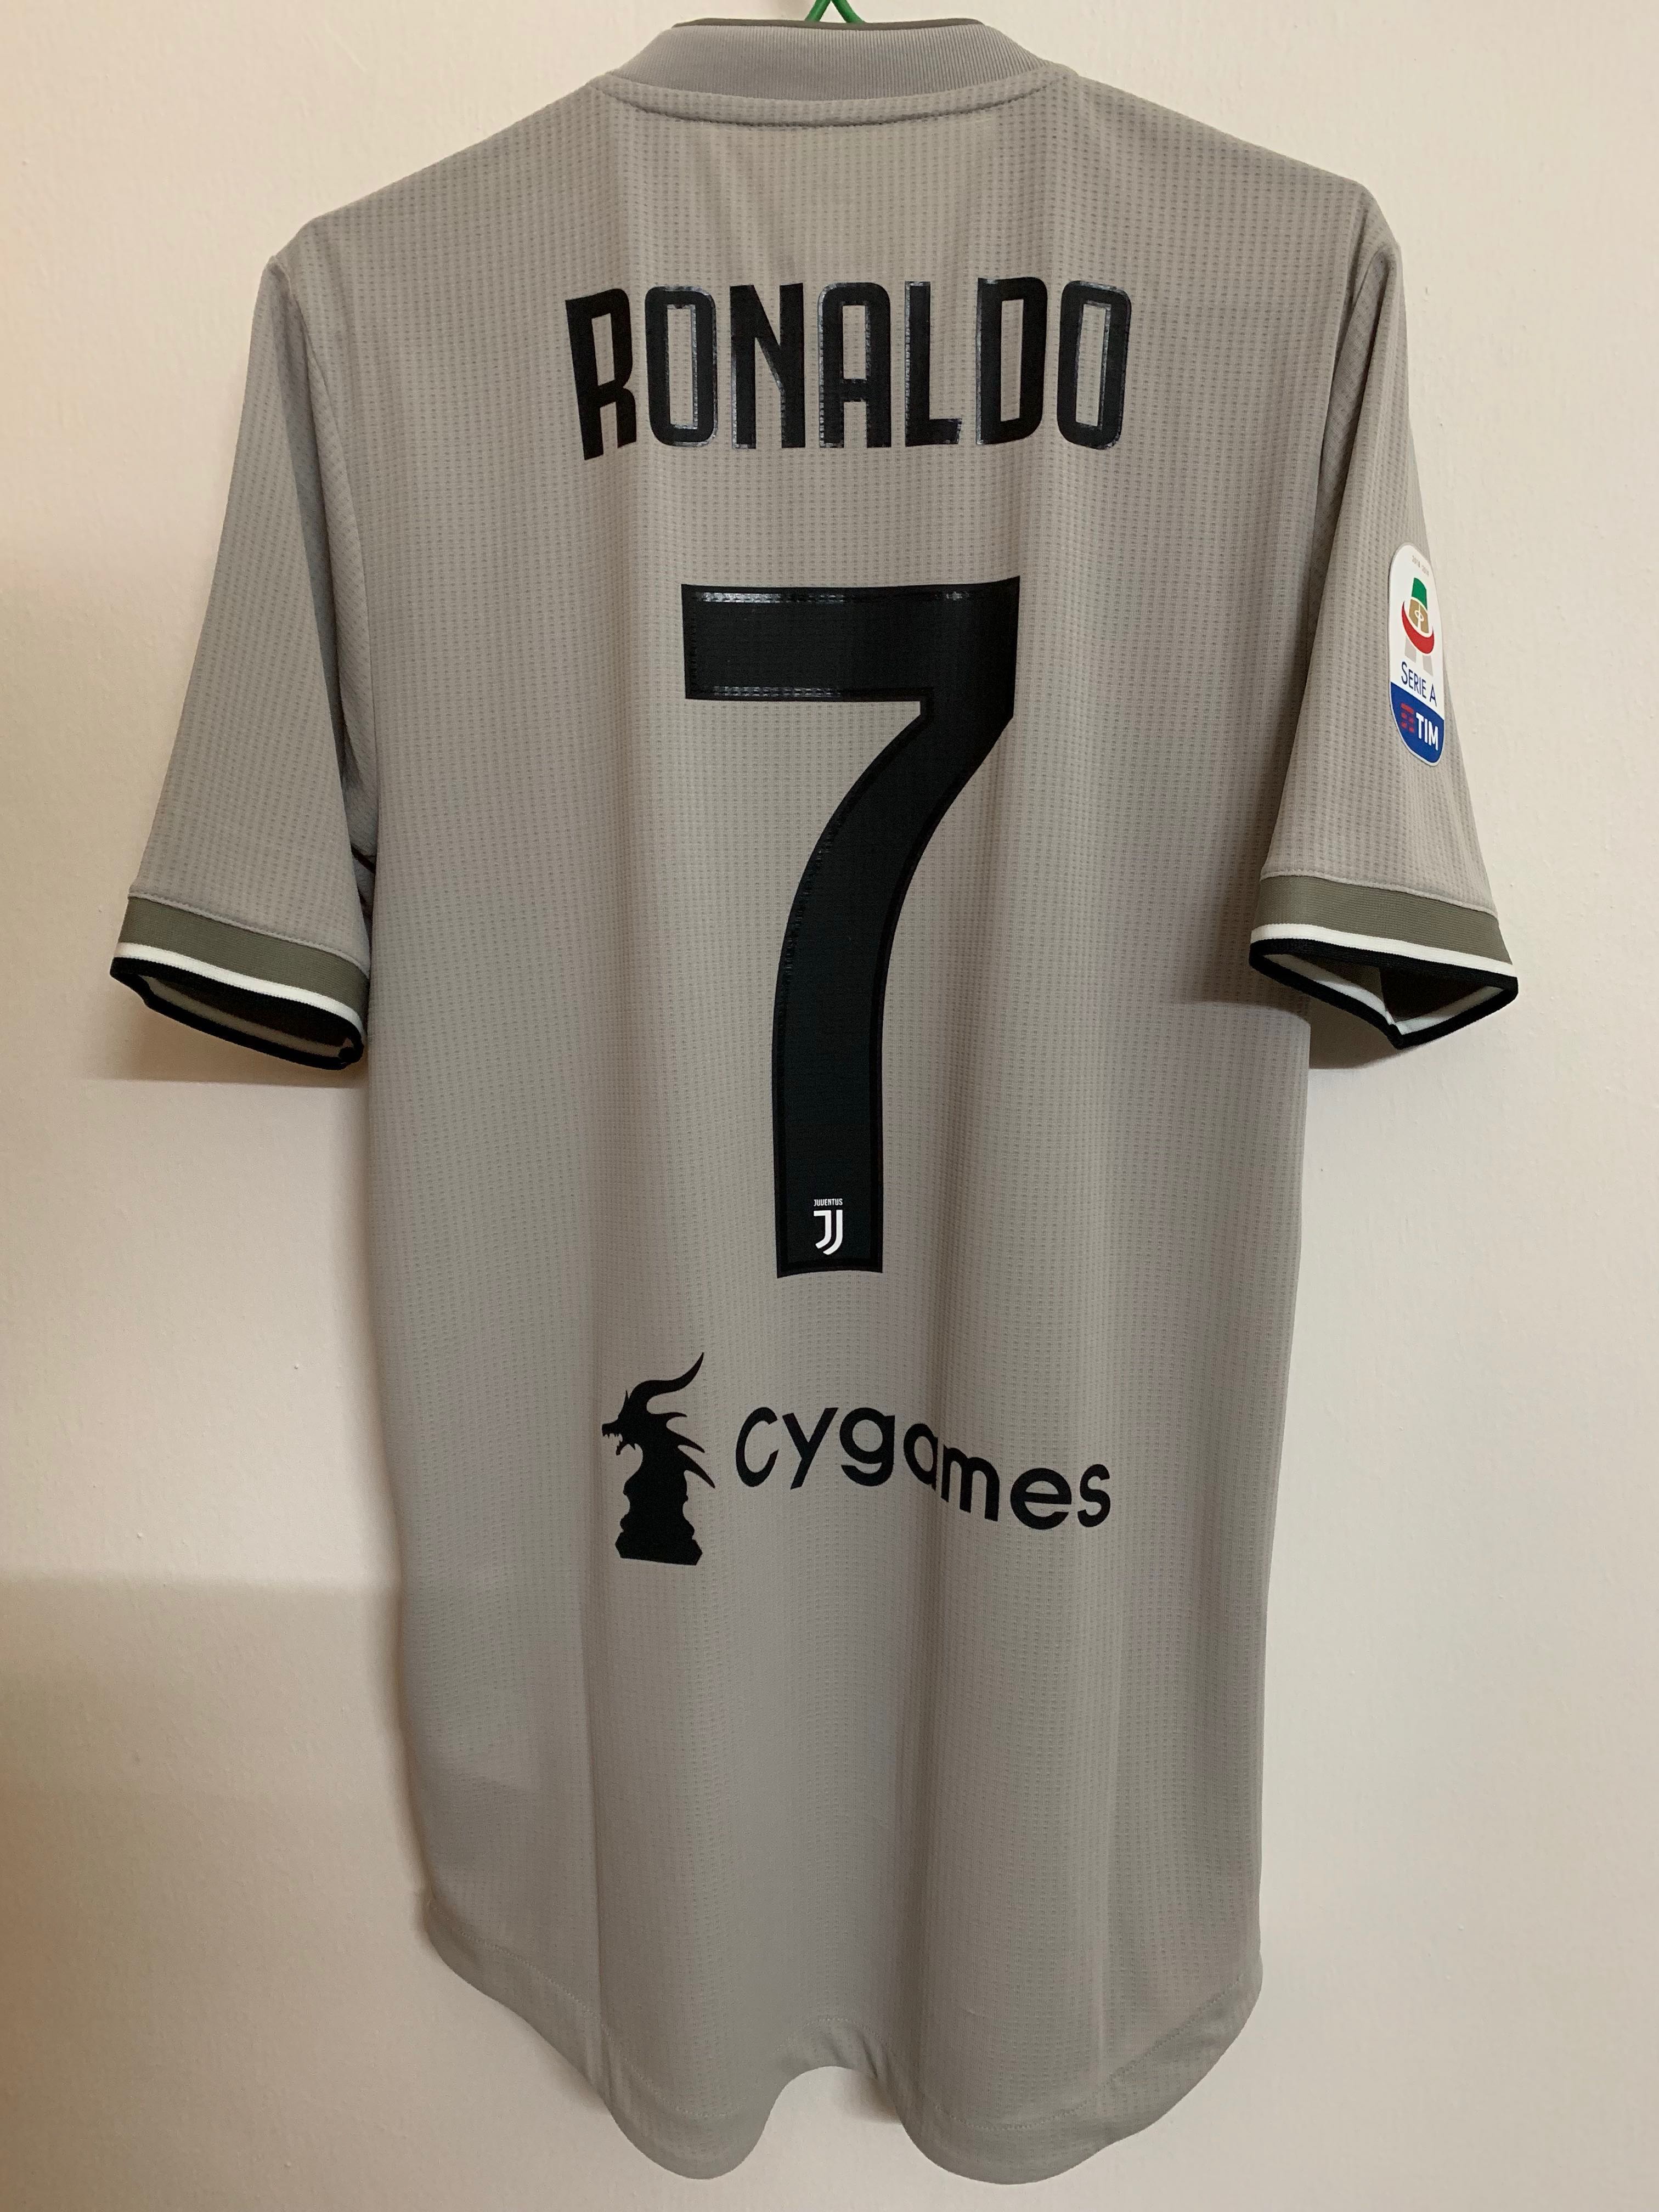 juventus climachill jersey